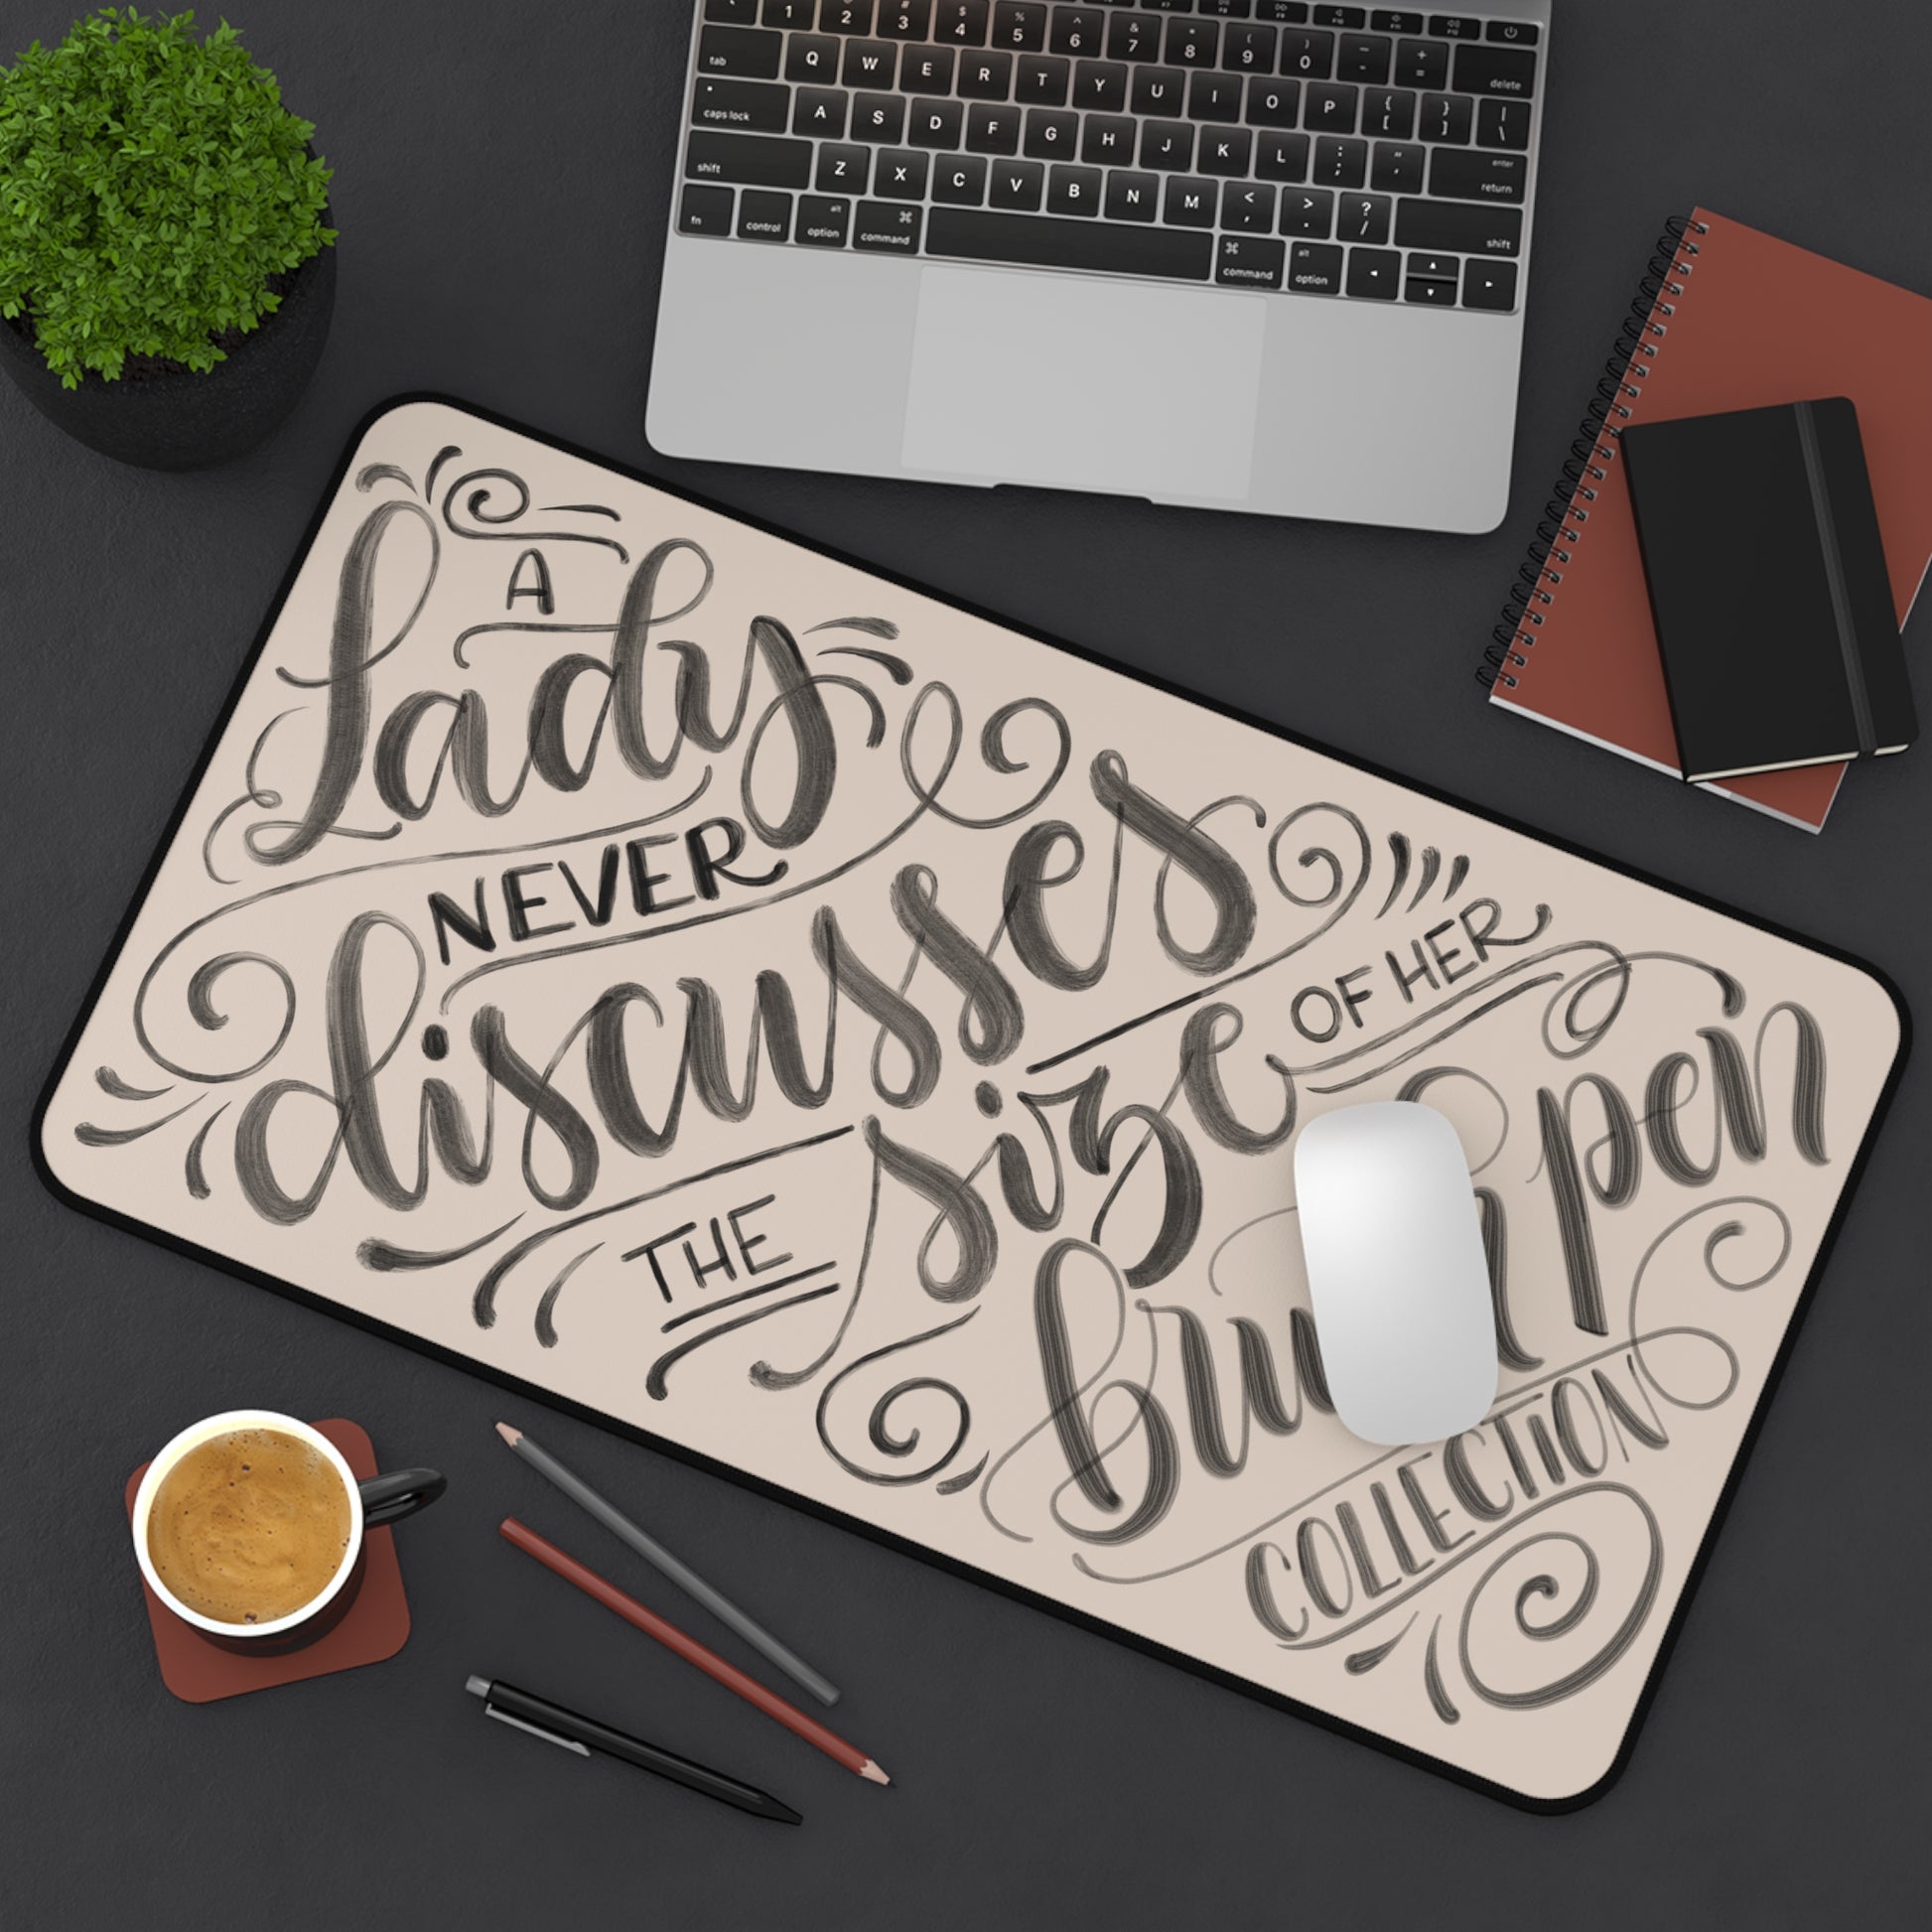 A lady never discusses the size of her brush pen collection - Tan Desk Mat - howjoyfulshop